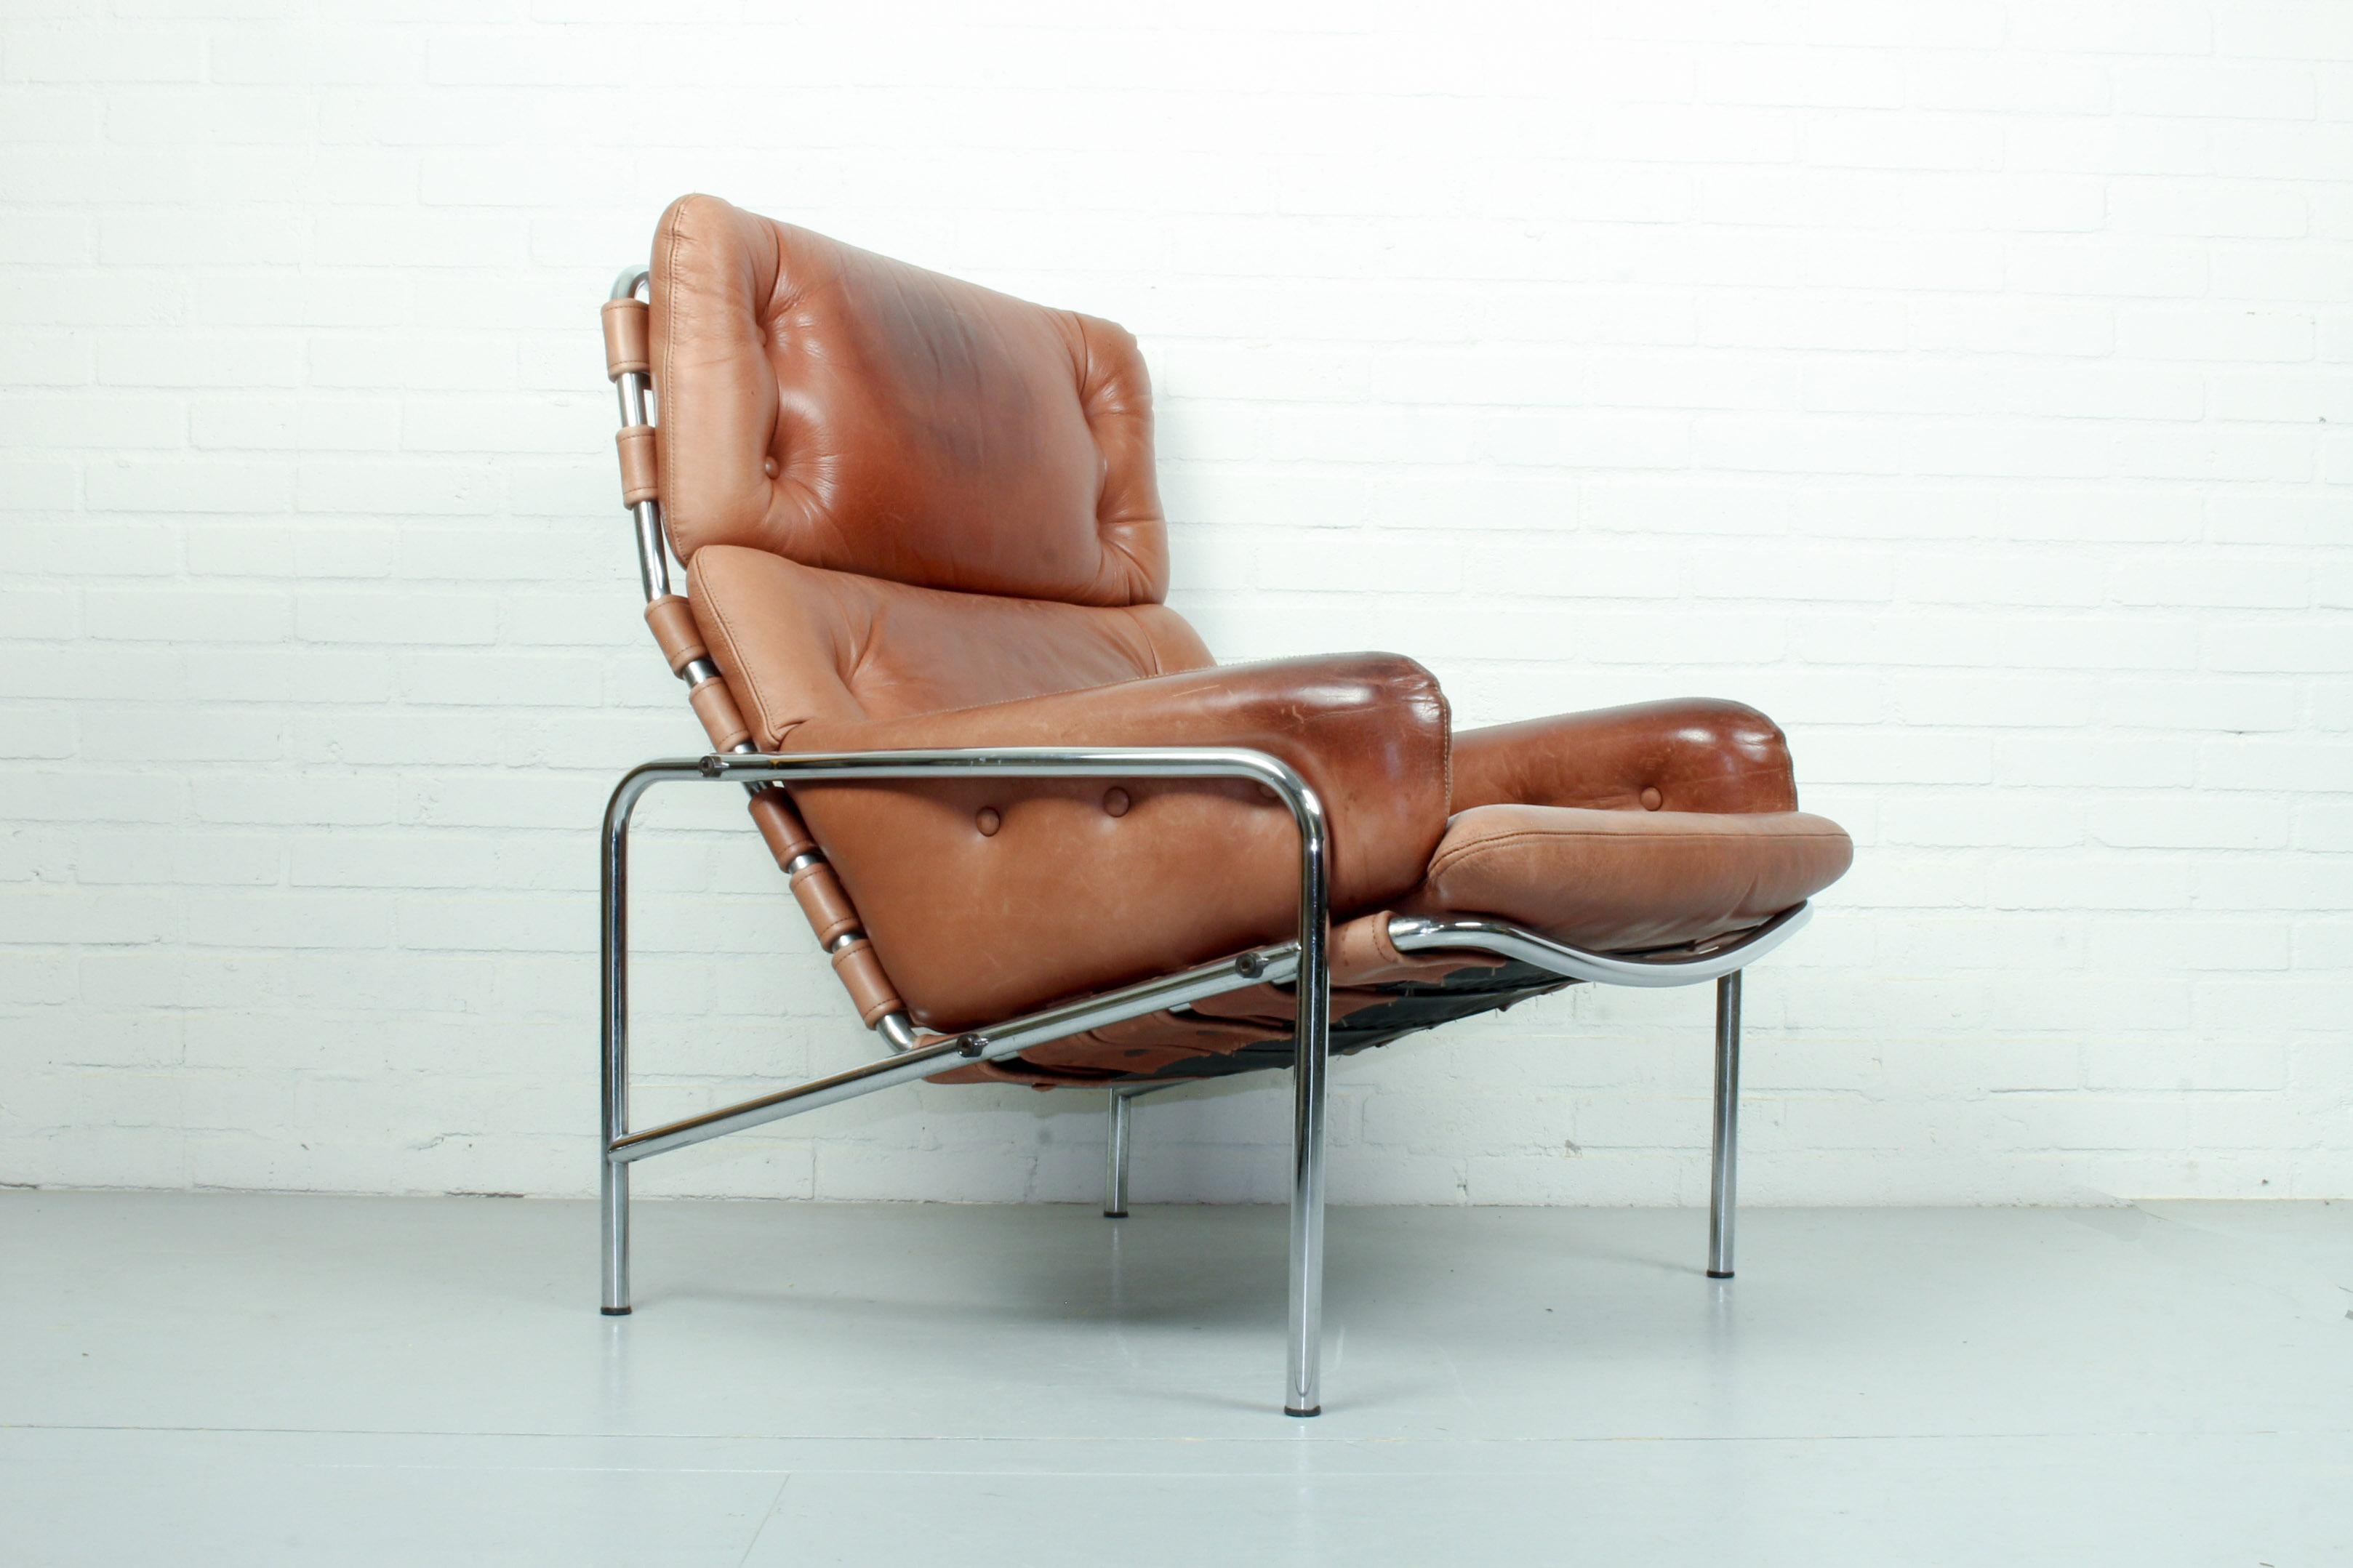 In 1969 this chair was designed by Martin Visser for the World Expo in Osaka Japan in 1970. Original brown leather in good condition with nice patina. The Bauhaus style frame is also in good condition.